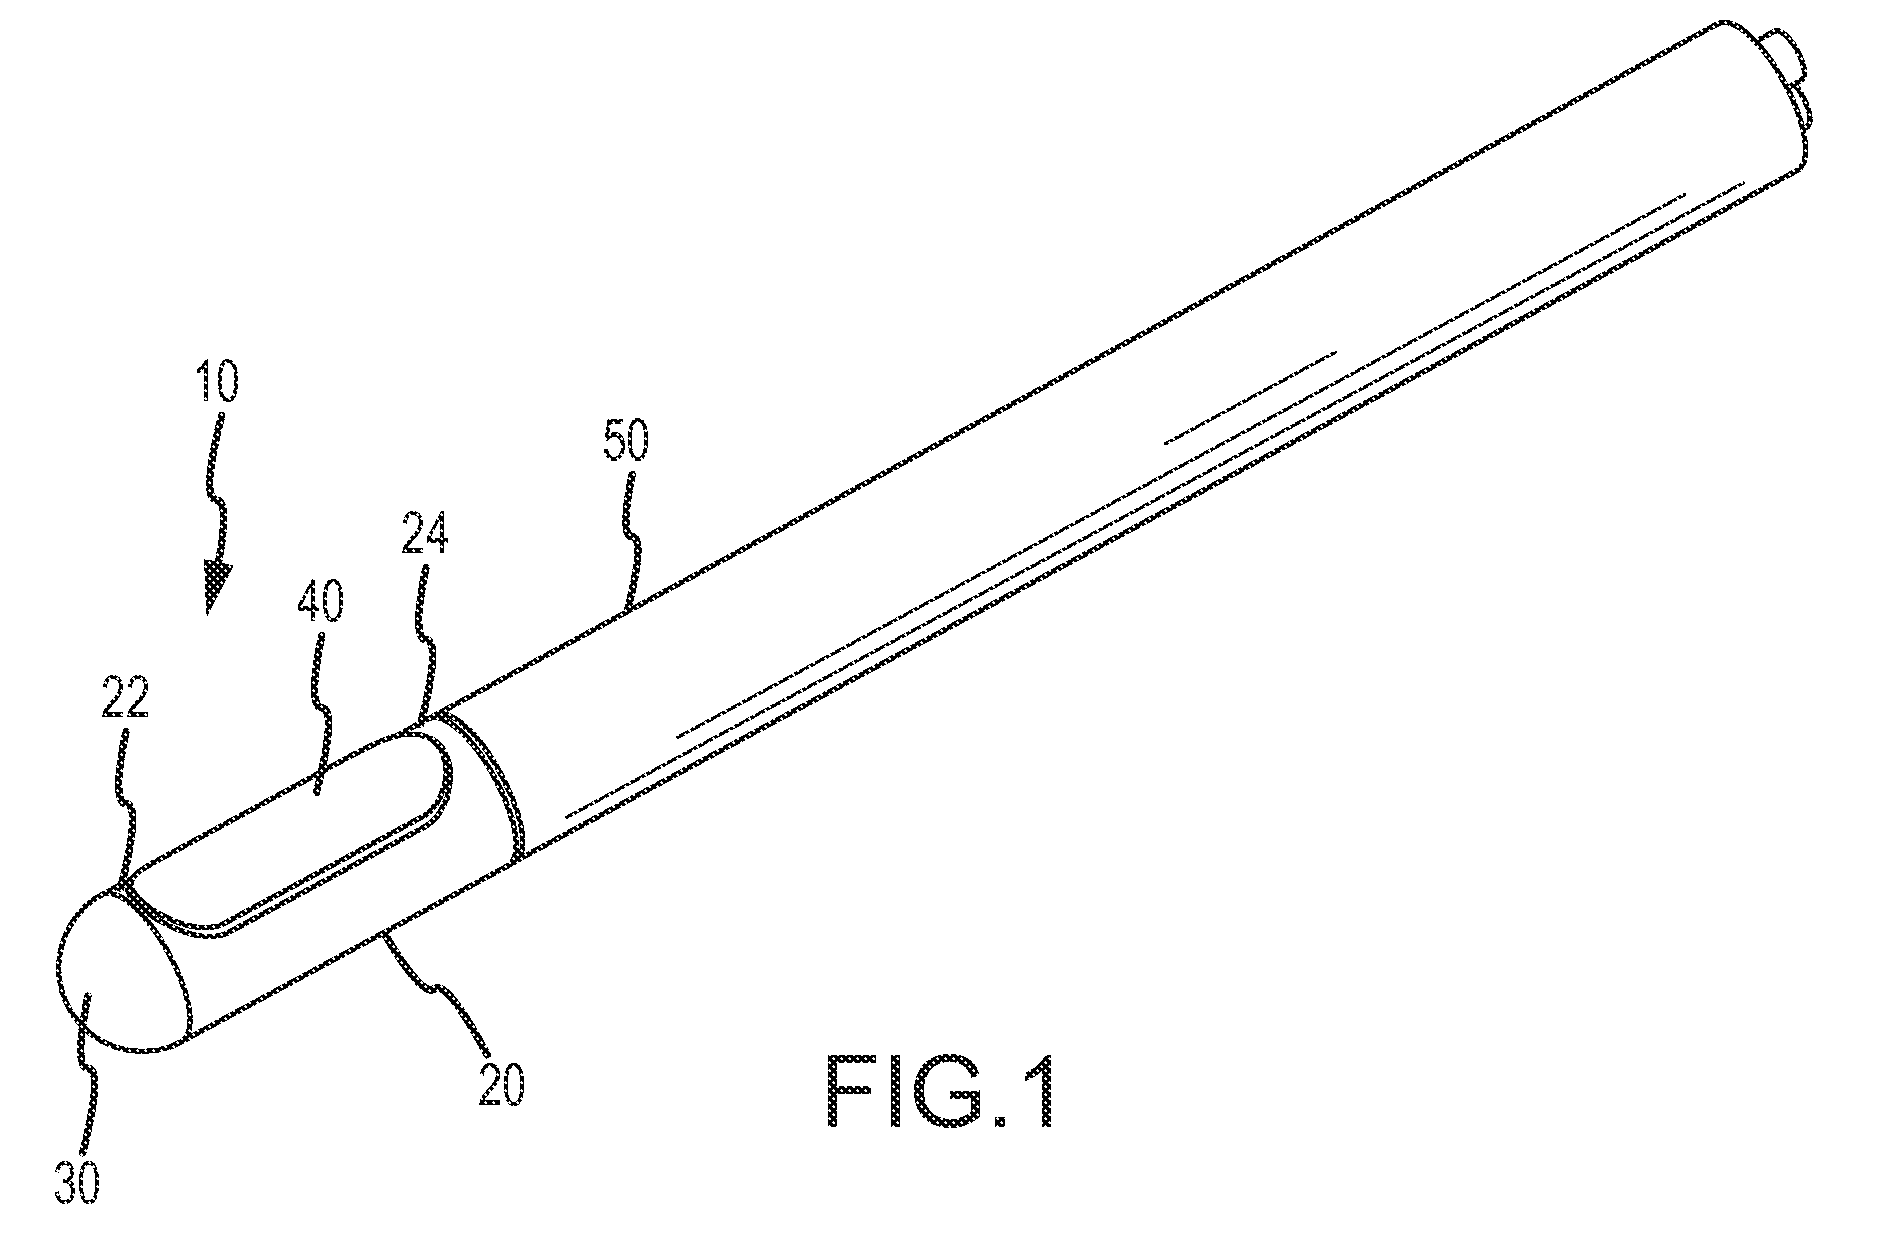 Ablation electrode and catheter assembly for epicardial mapping and ablation with directionally focused RF energy